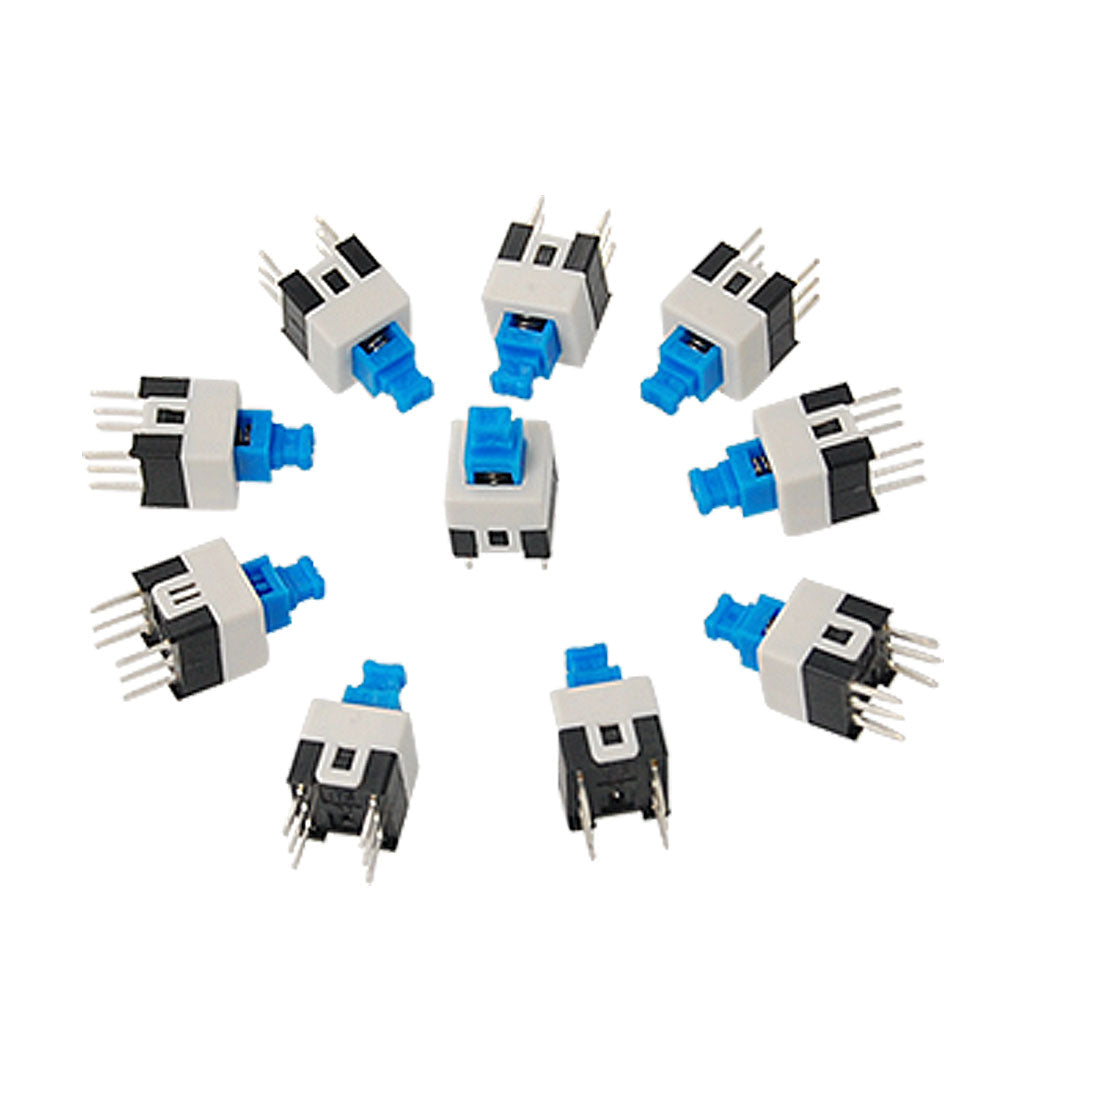 uxcell Uxcell 10 Pcs 7 x 7mm PCB Panel Mount Tact Tactile Push Button Switch Self Lock 6 Pin